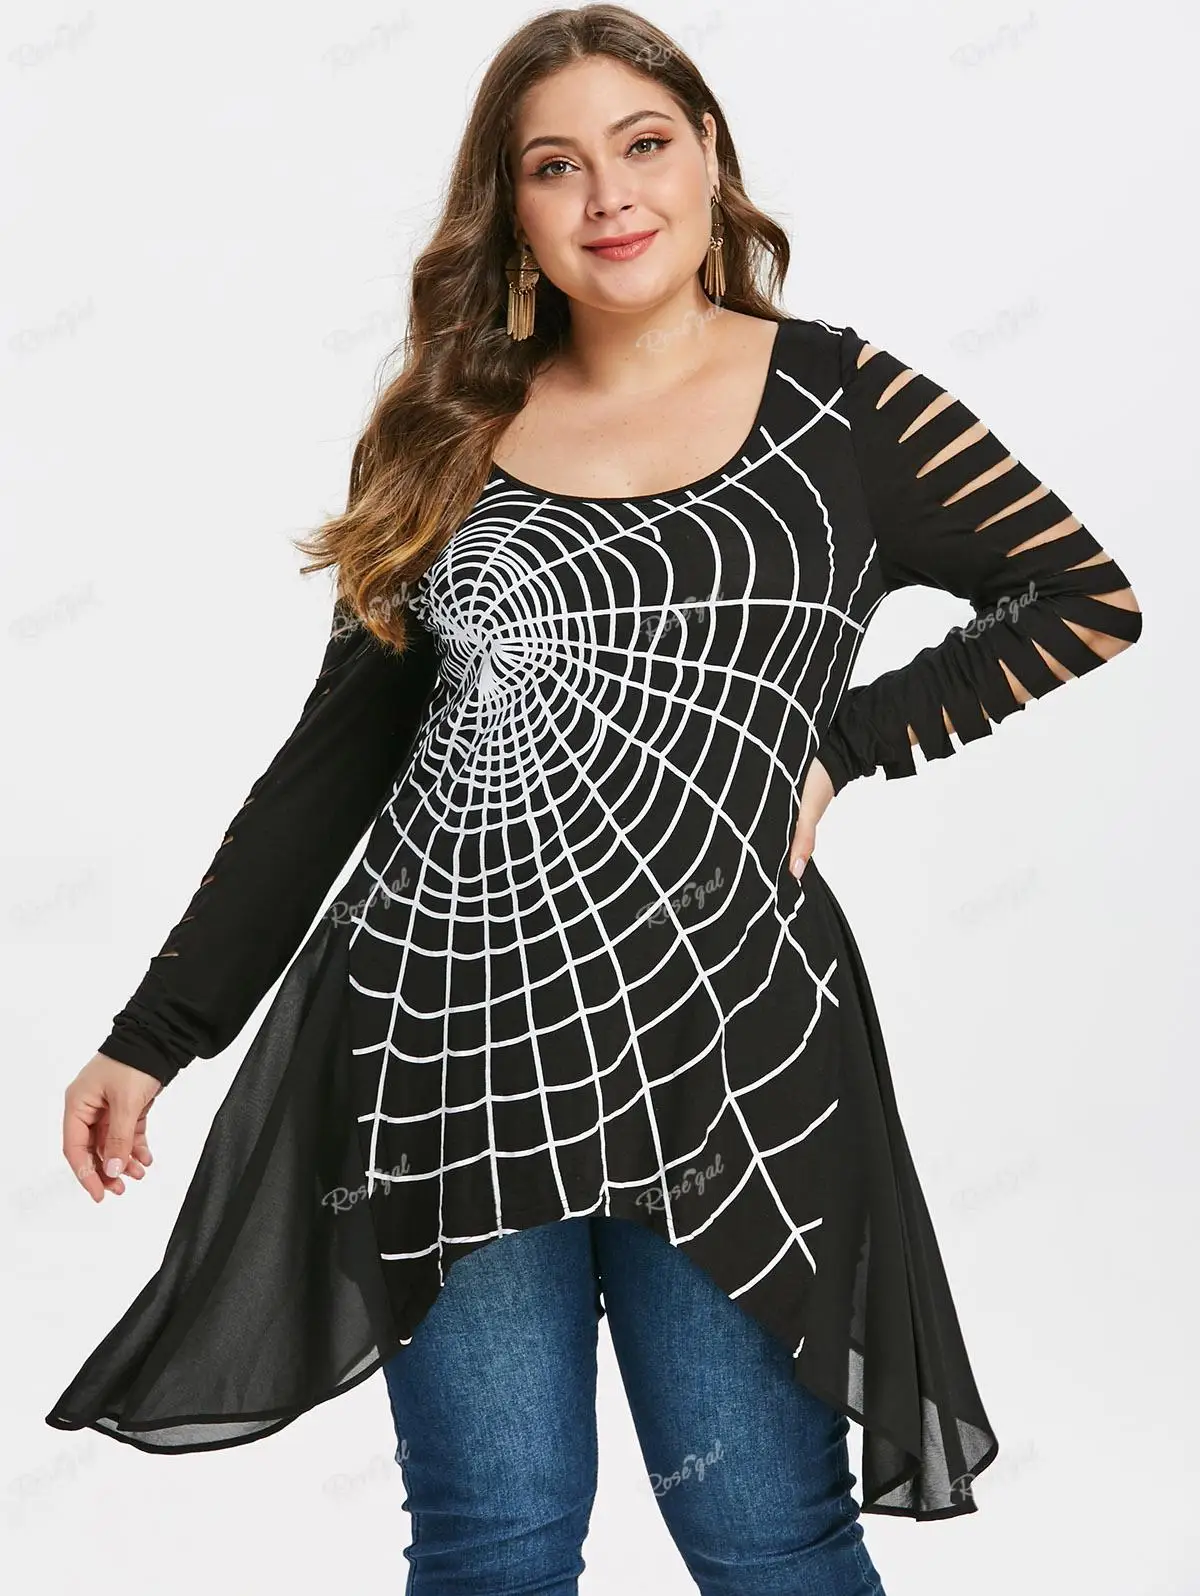 

ROSEGAL Plus Size Asymmetrical T-shirt Spider Web Printed Hollow Out Ripped Sleeves Tops Women Black Casual Tees